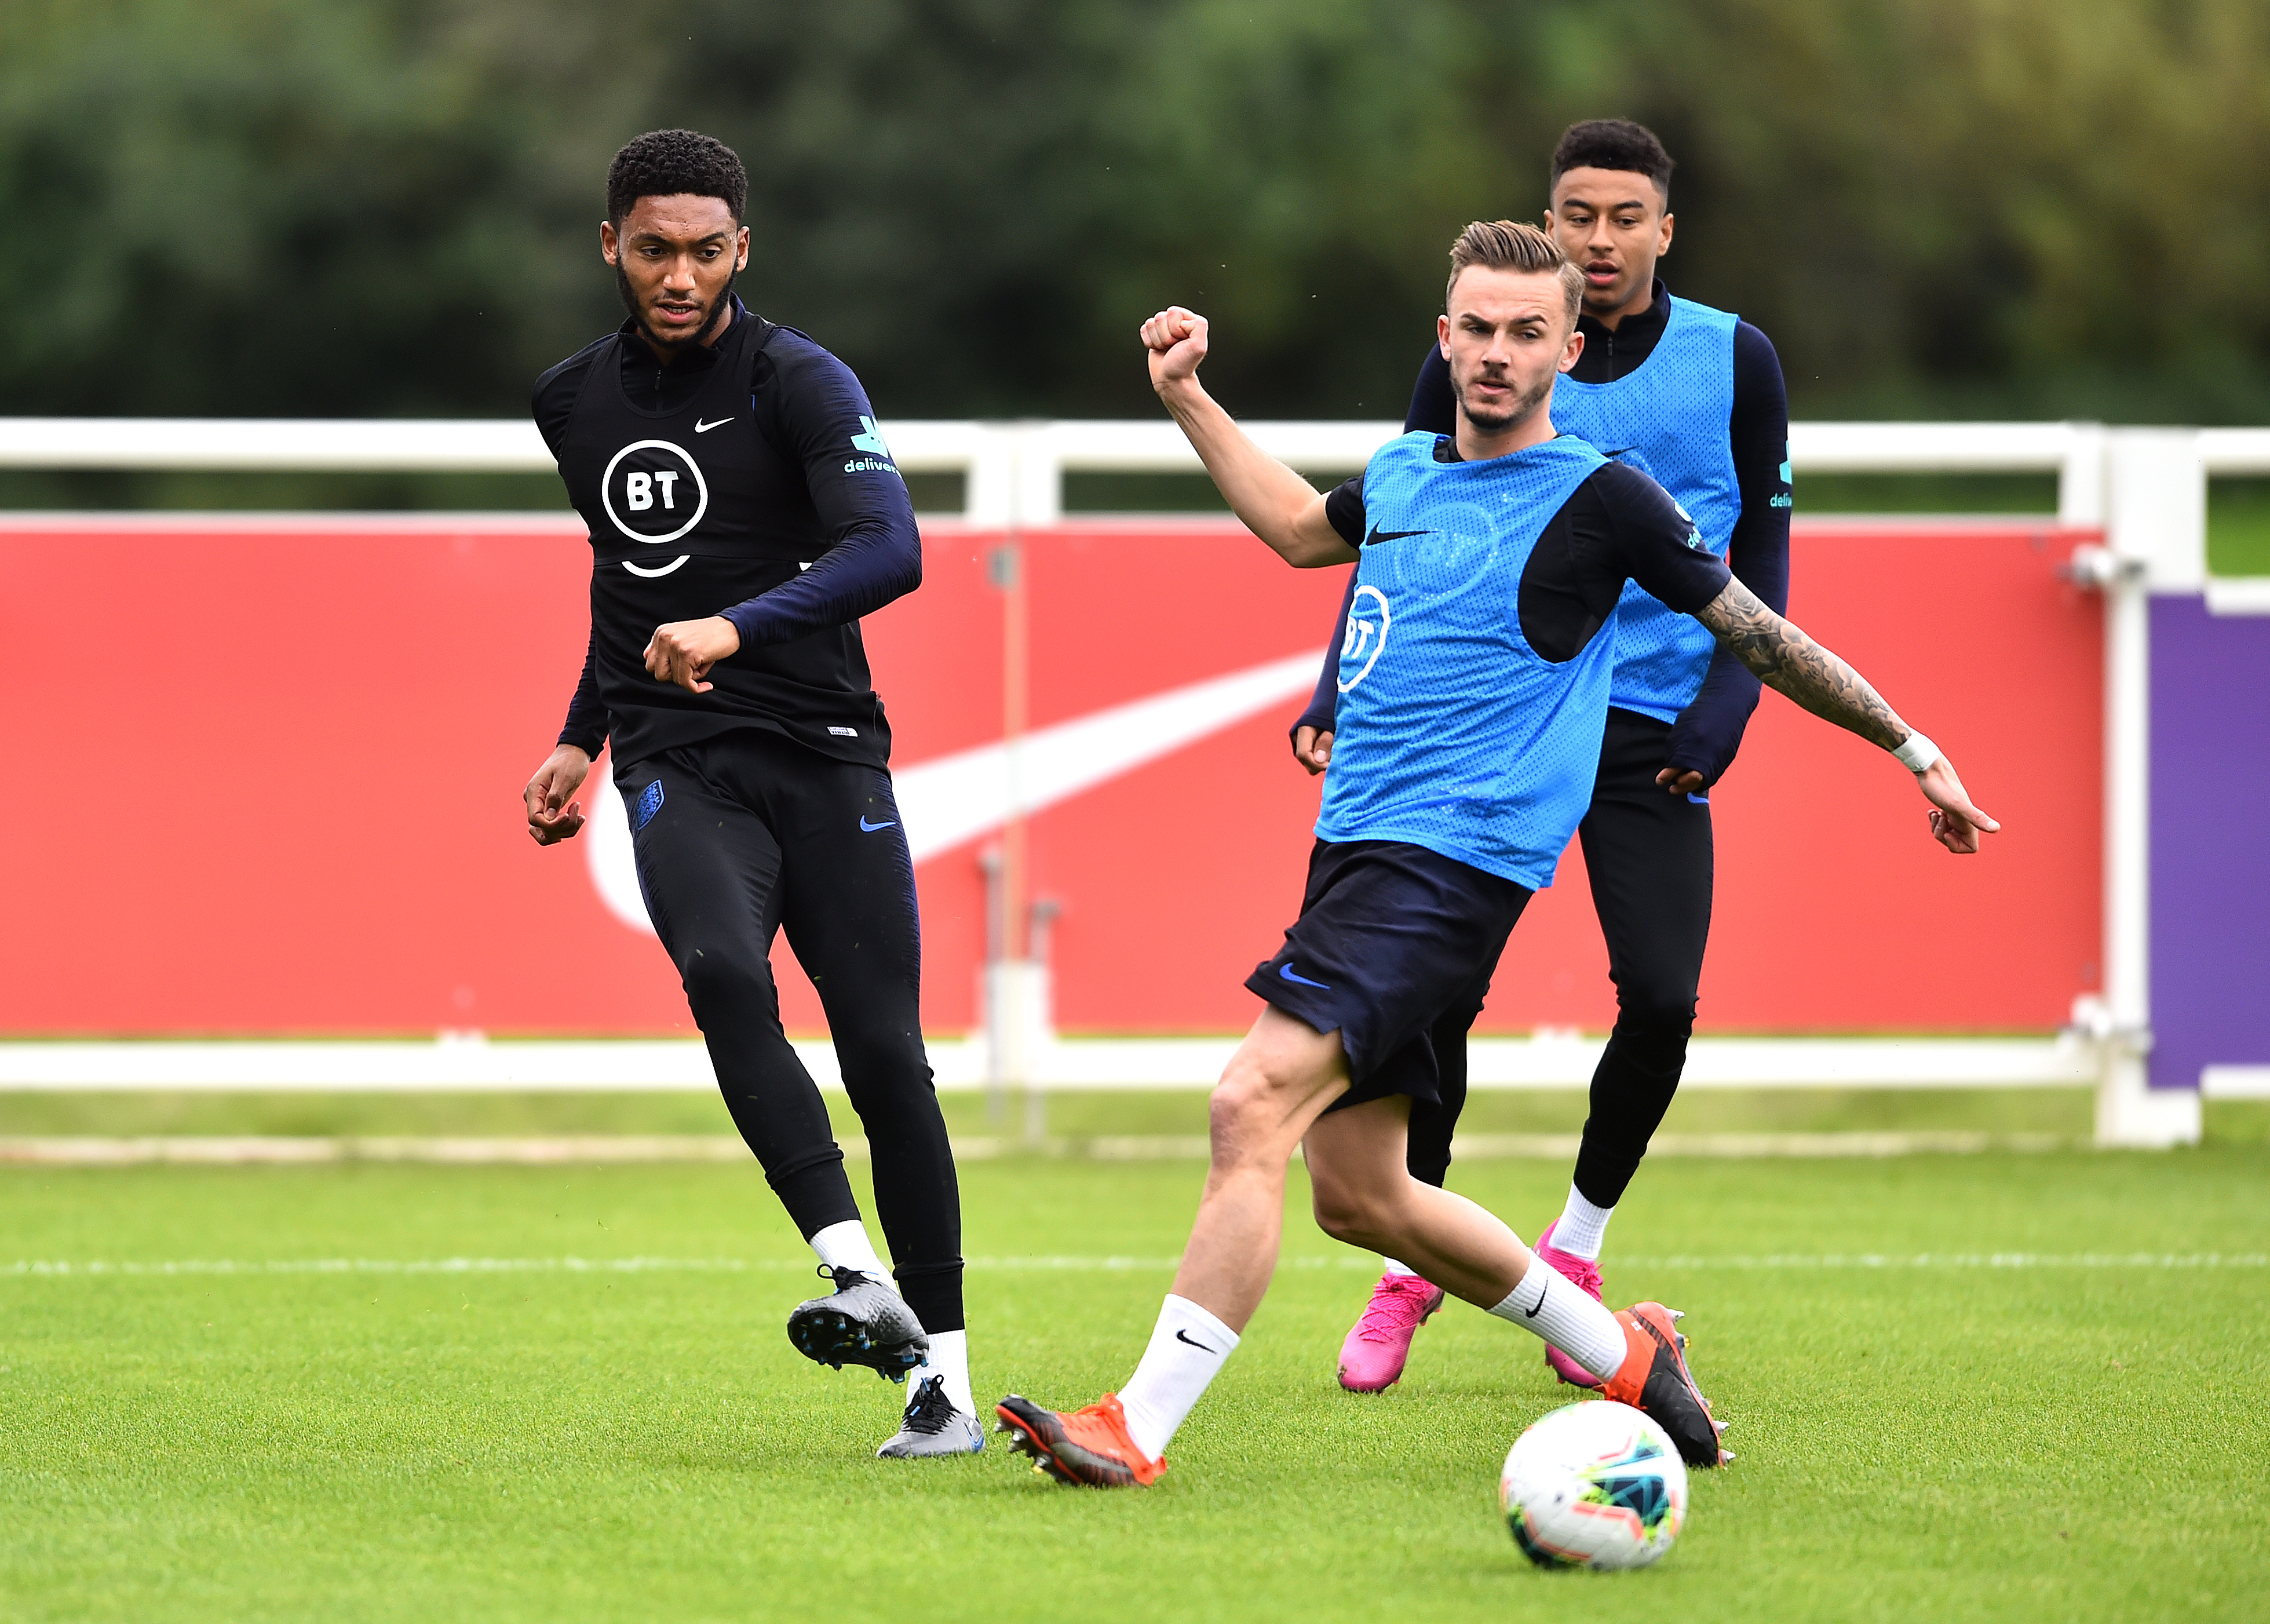 BURTON-UPON-TRENT, ENGLAND - SEPTEMBER 02: Joe Gomez, James Maddison and Jesse Lingard train during an England Media Access day at St Georges Park on September 02, 2019 in Burton-upon-Trent, England. (Photo by Nathan Stirk/Getty Images)